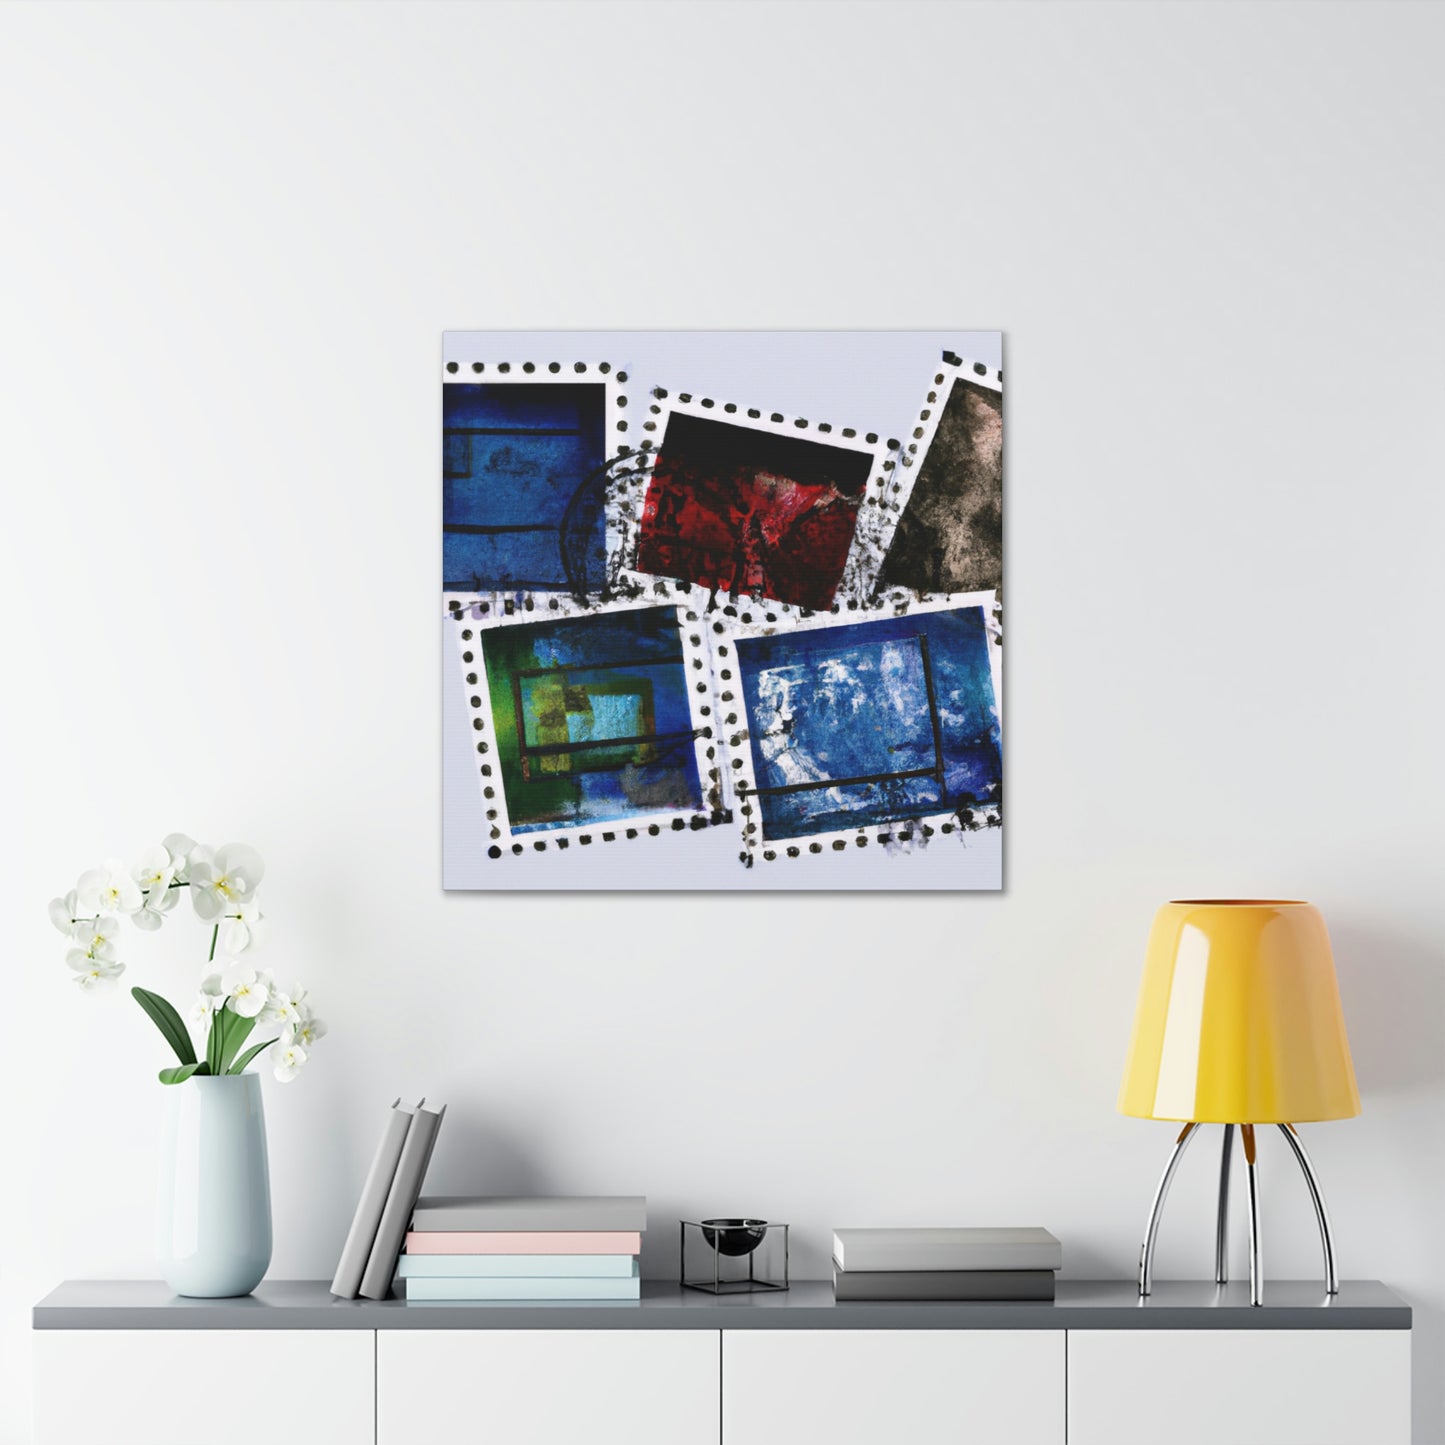 Global Express Stamps - Postage Stamp Collector Canvas Wall Art